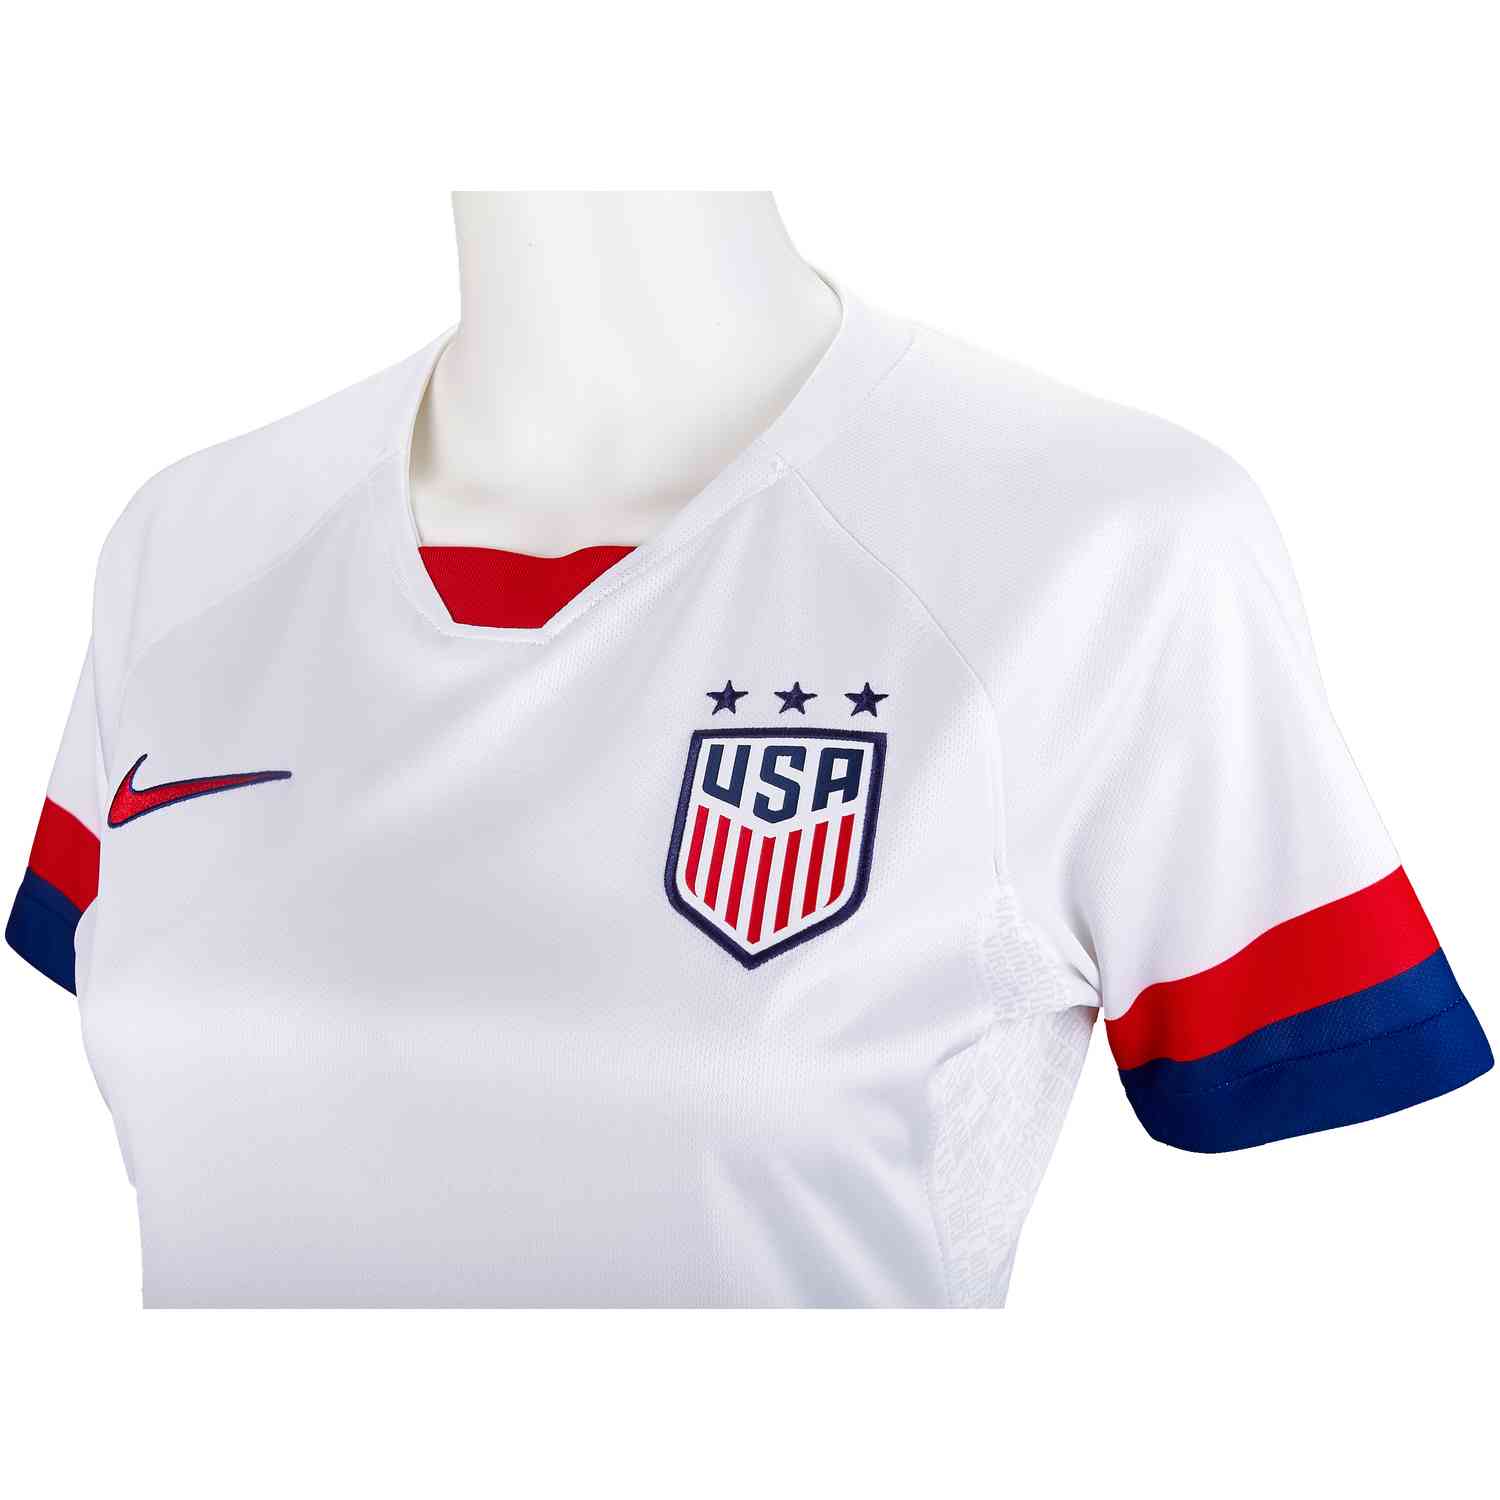 Nike USWNT Men's 2019 Home Stadium Jersey (White/Blue Void/University Red) - Adult Small